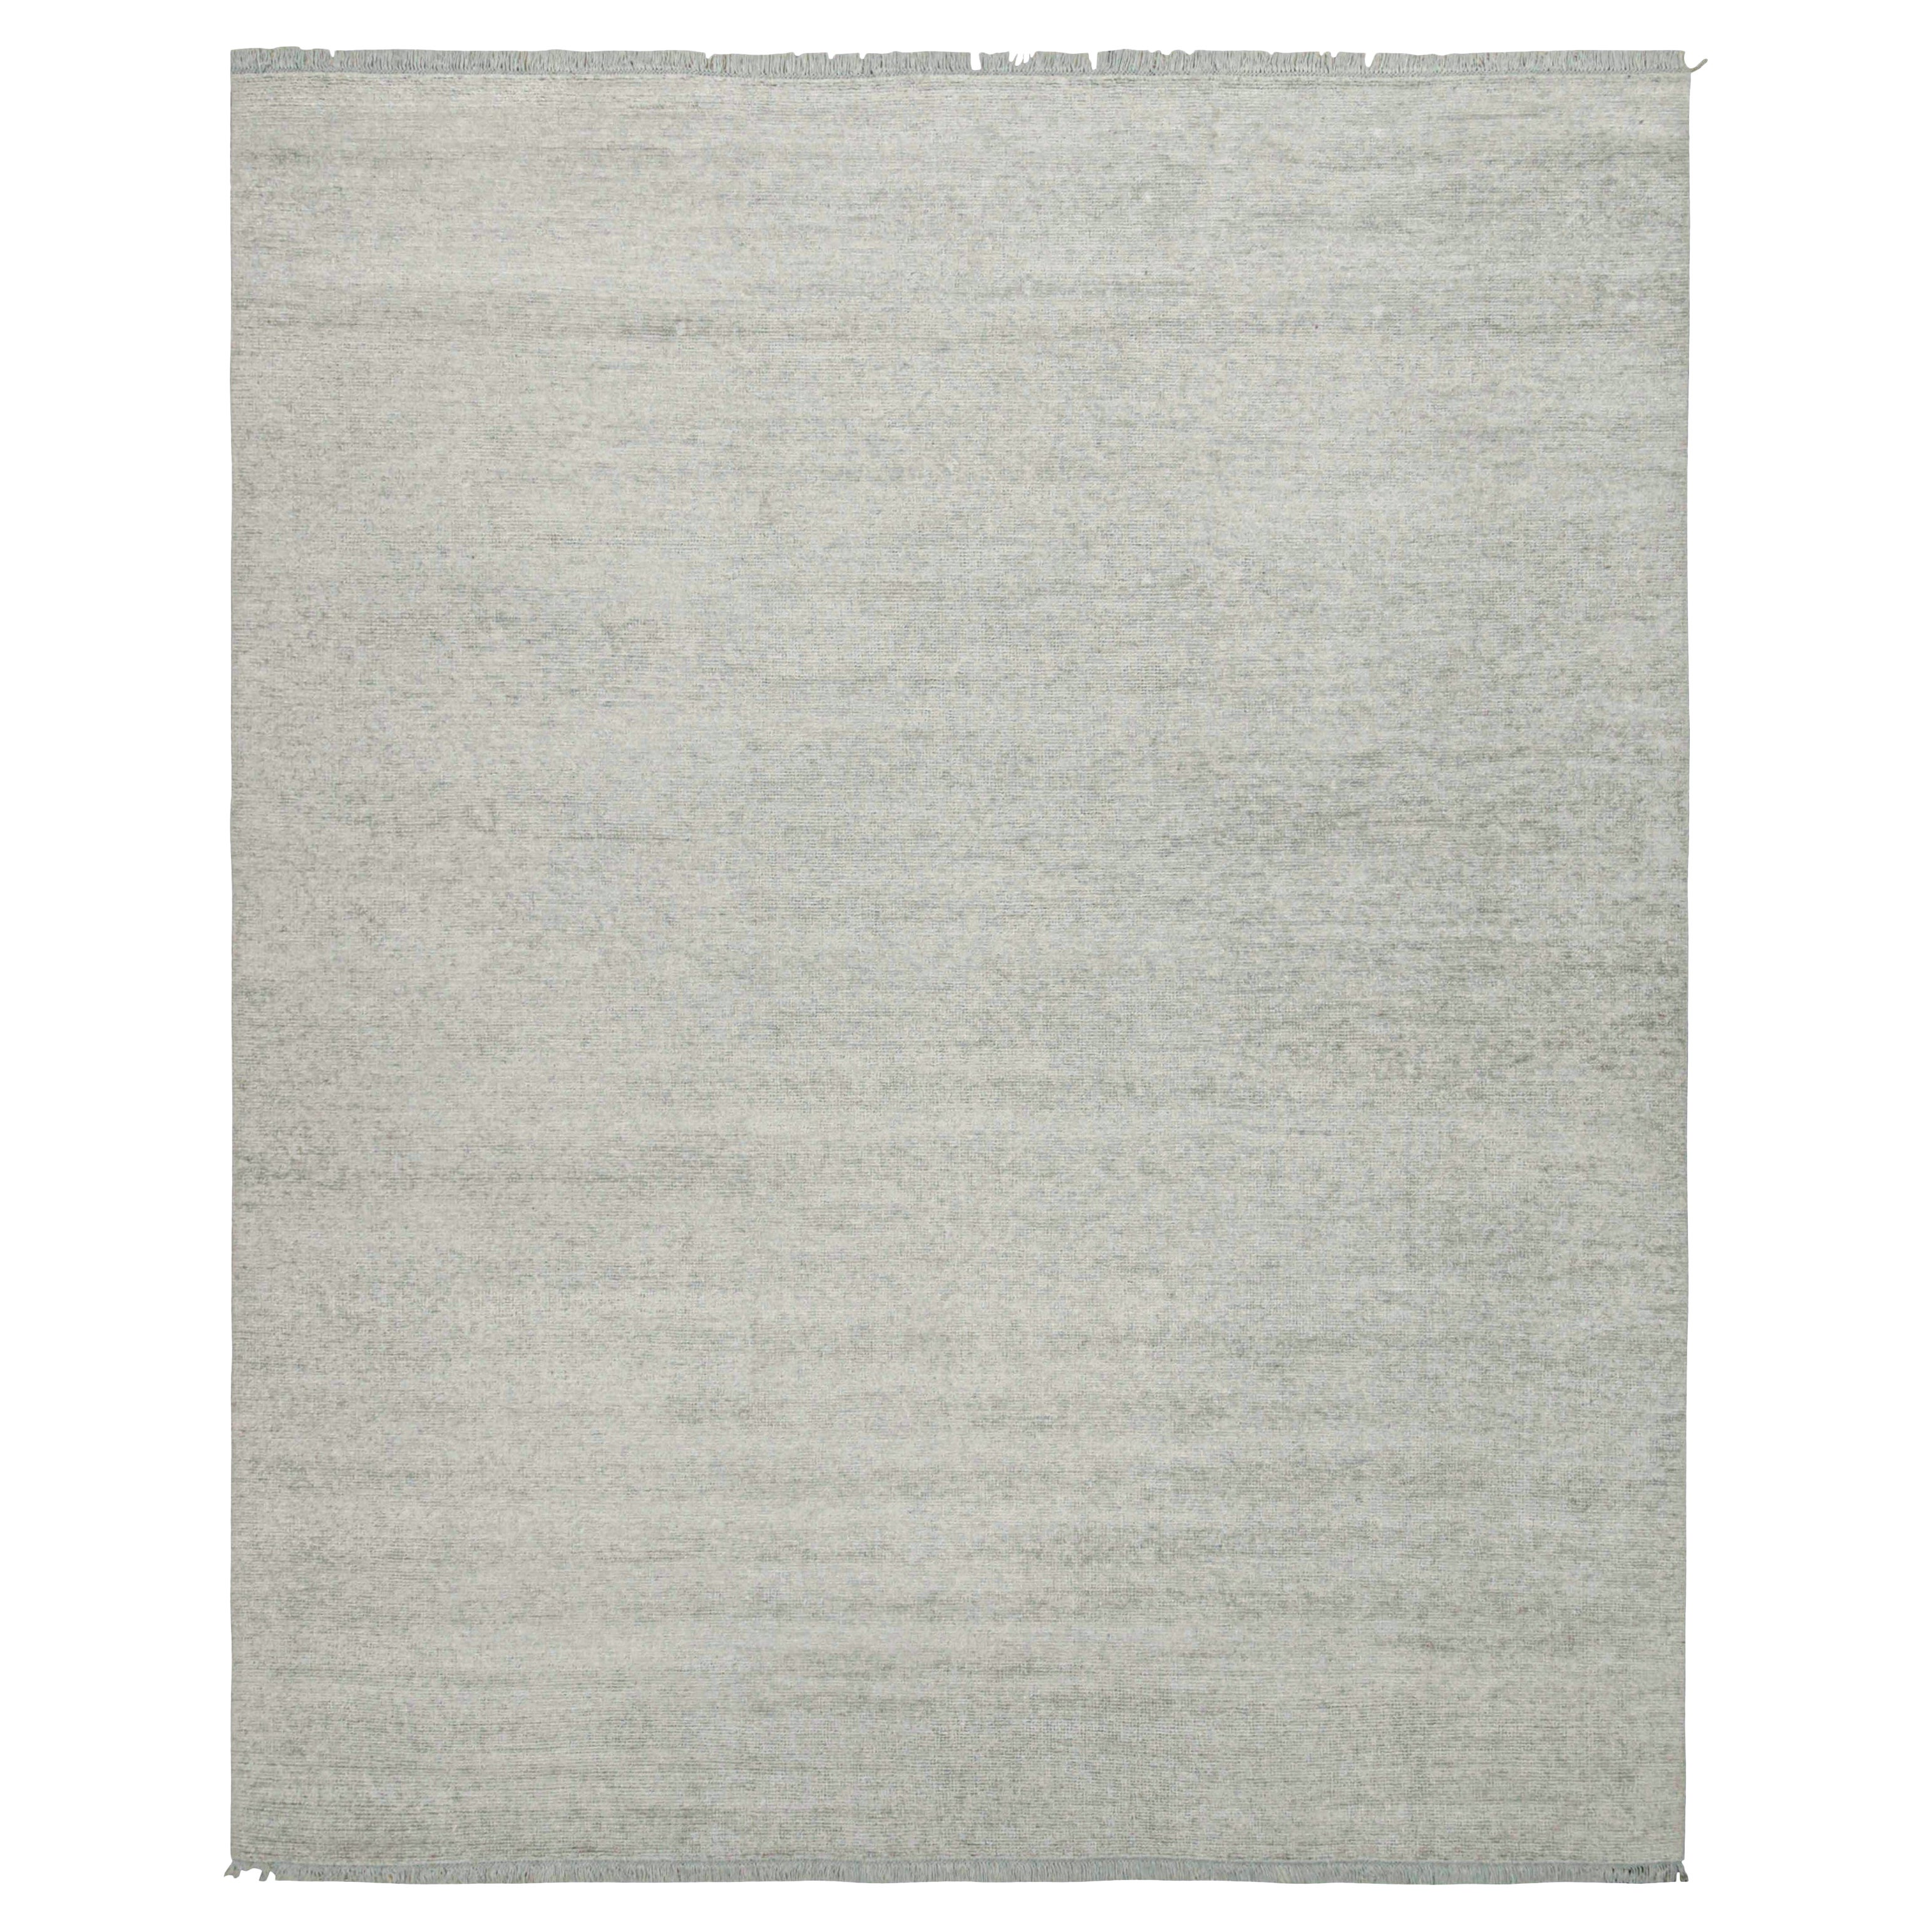 Rug & Kilim’s Modern Rug in Solid Silver-Gray Tone-on-tone Striae For Sale